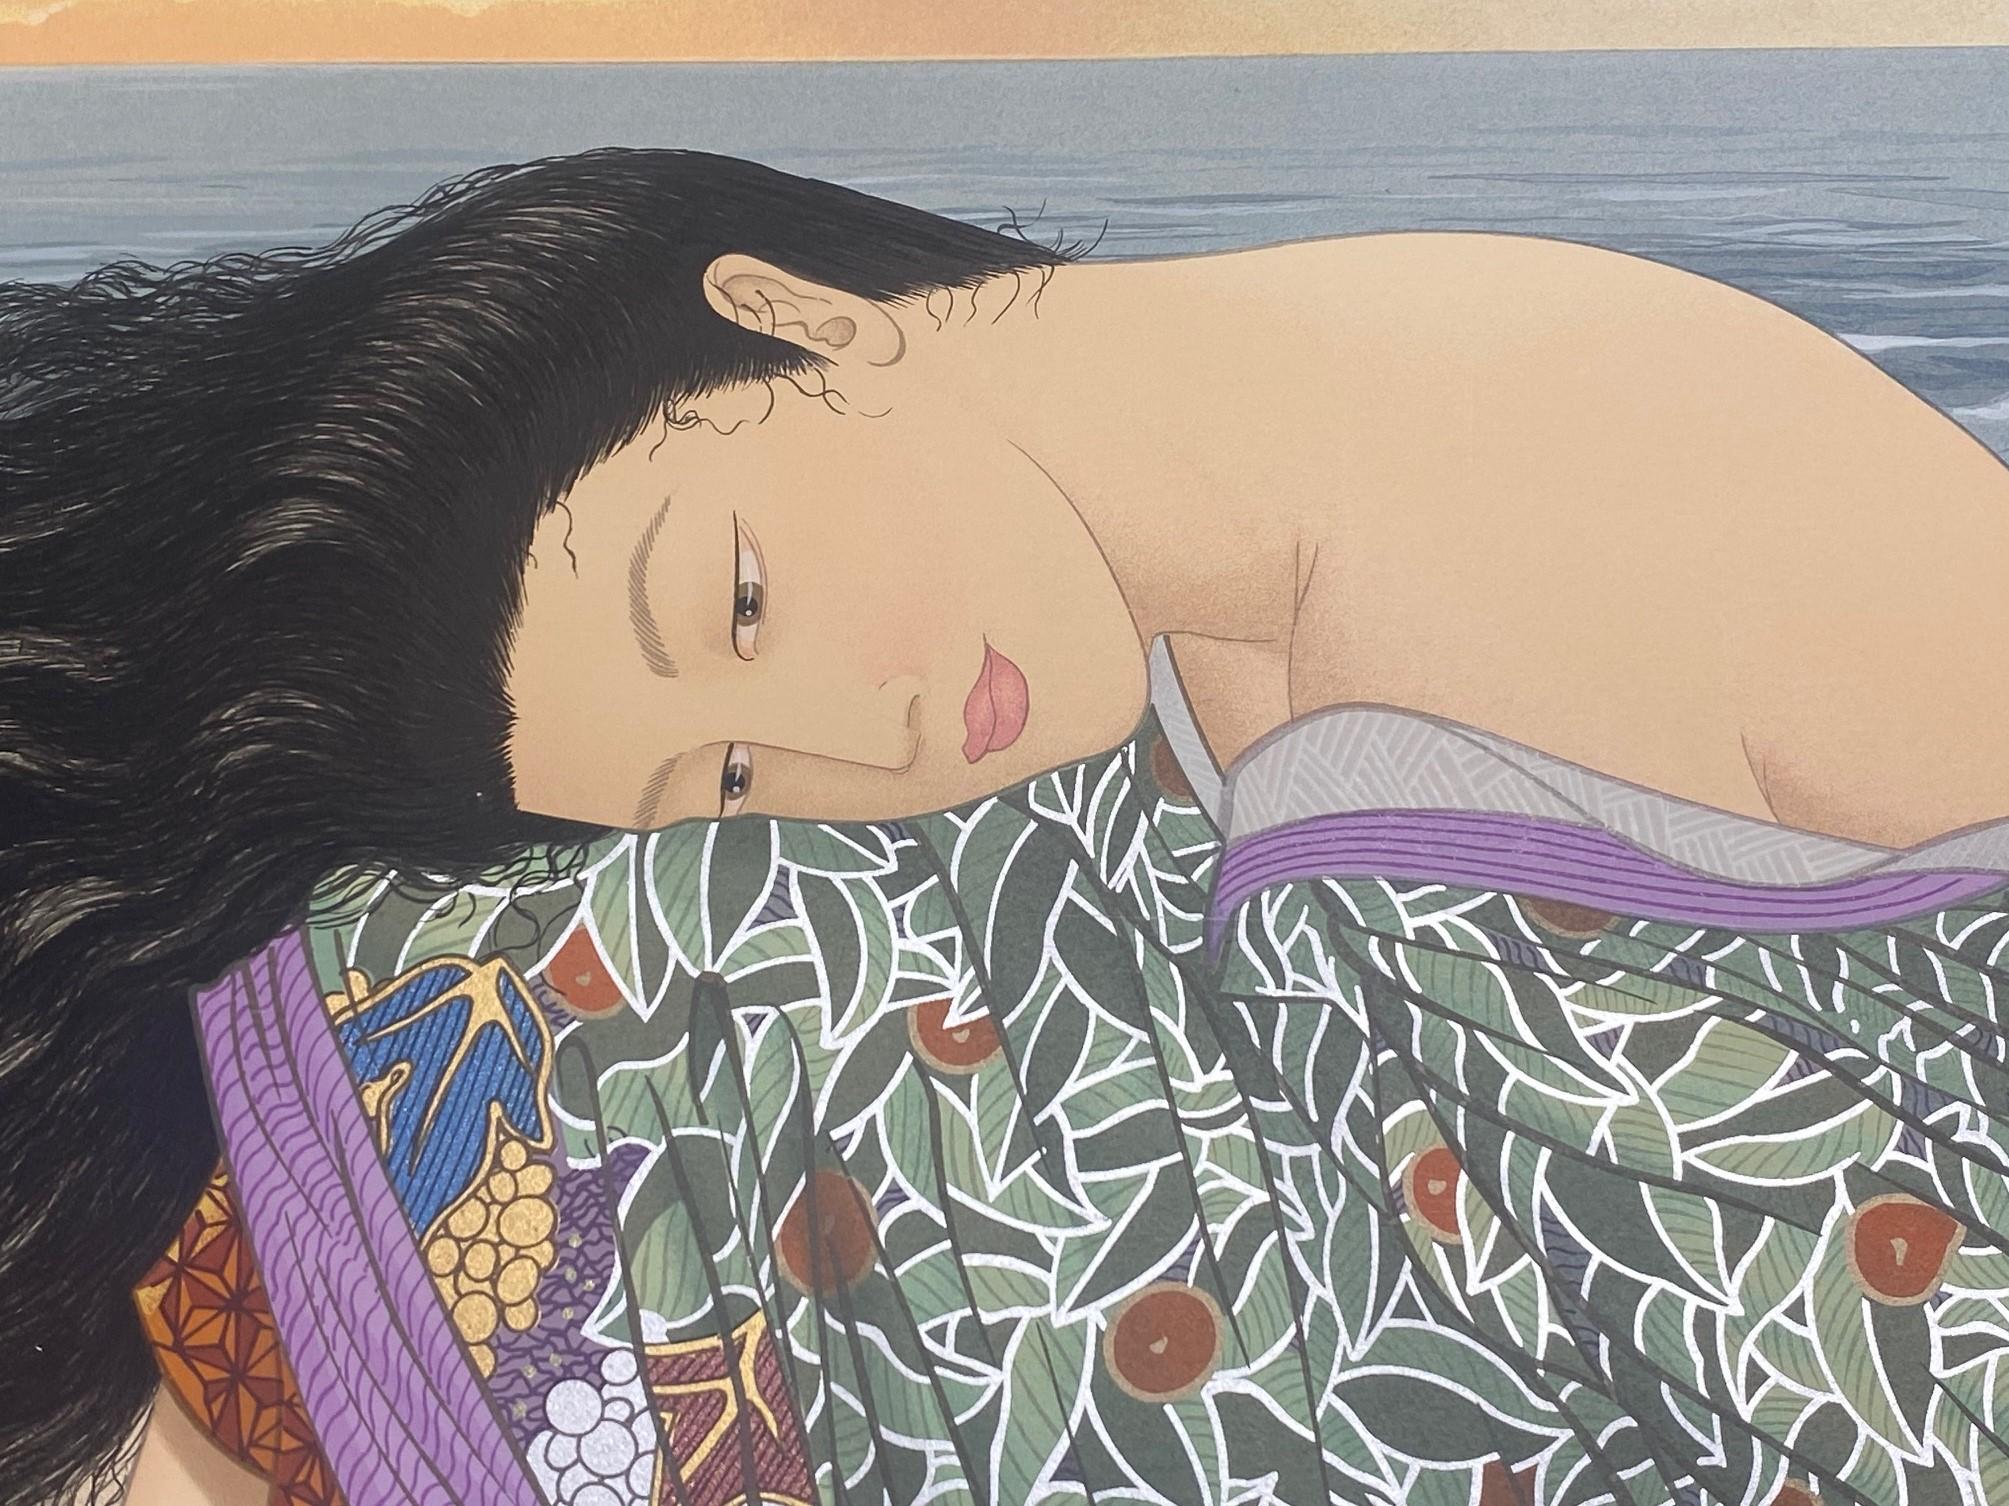 American Muramasa Kudo Signed Limited Edition Japanese Serigraph Print Wicker Basket For Sale